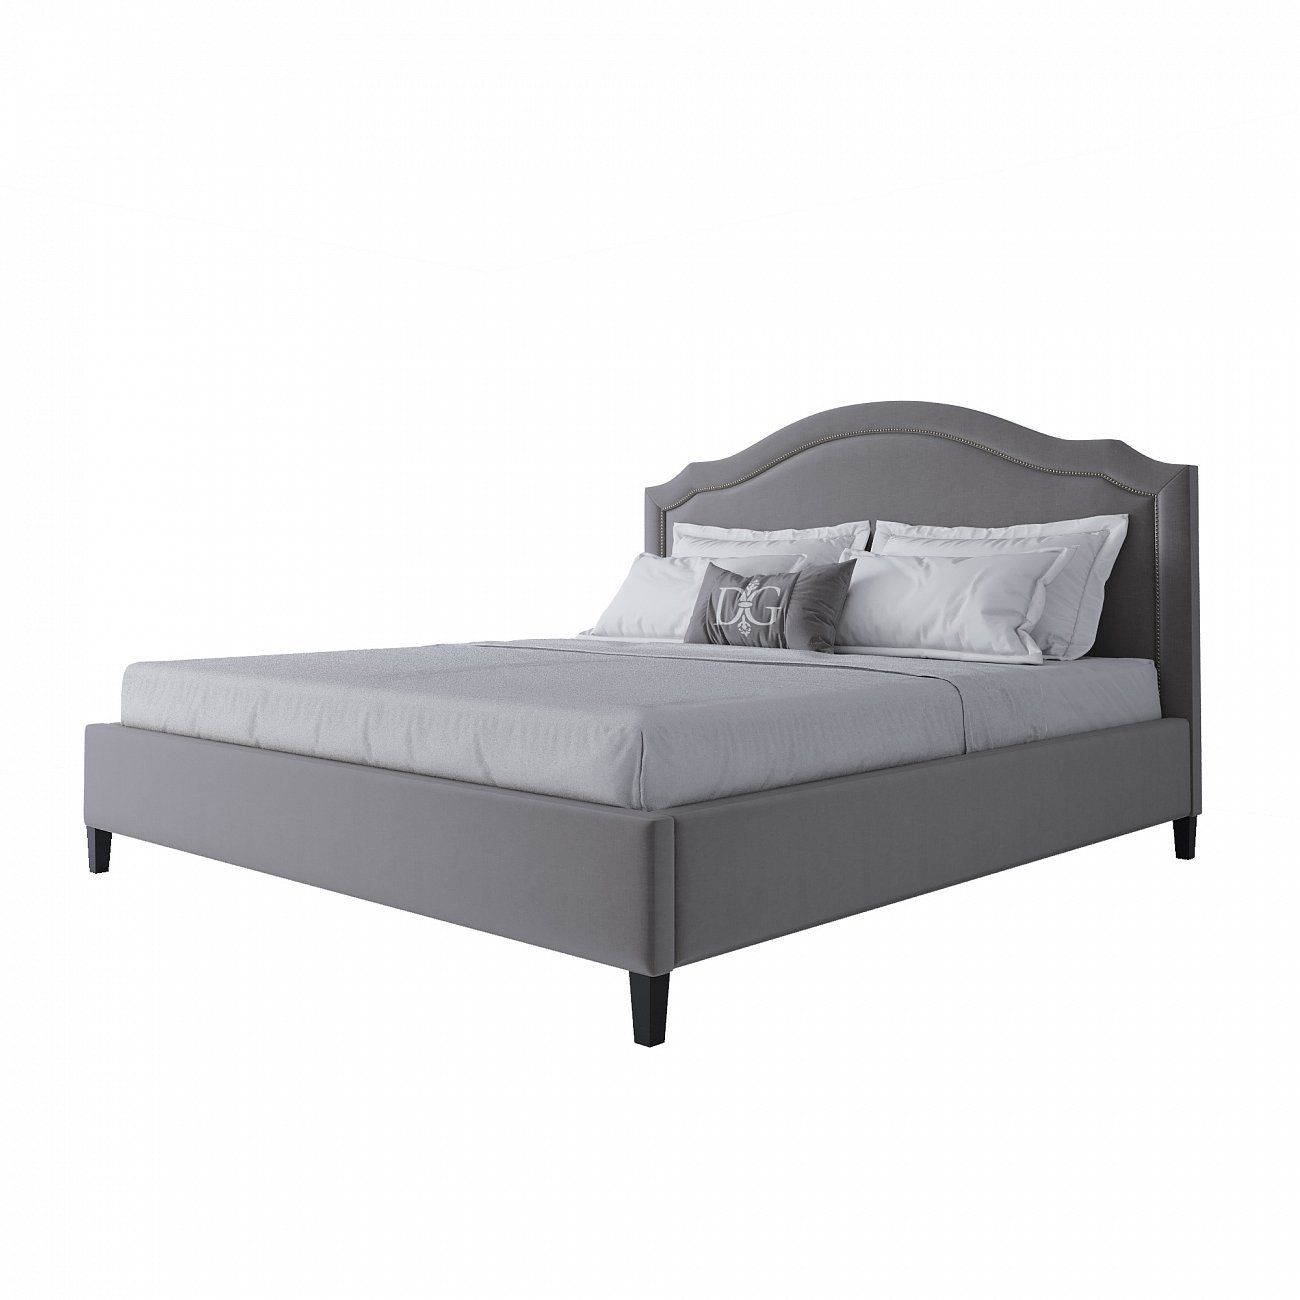 Cassis Upholstered double bed 180x200 grey